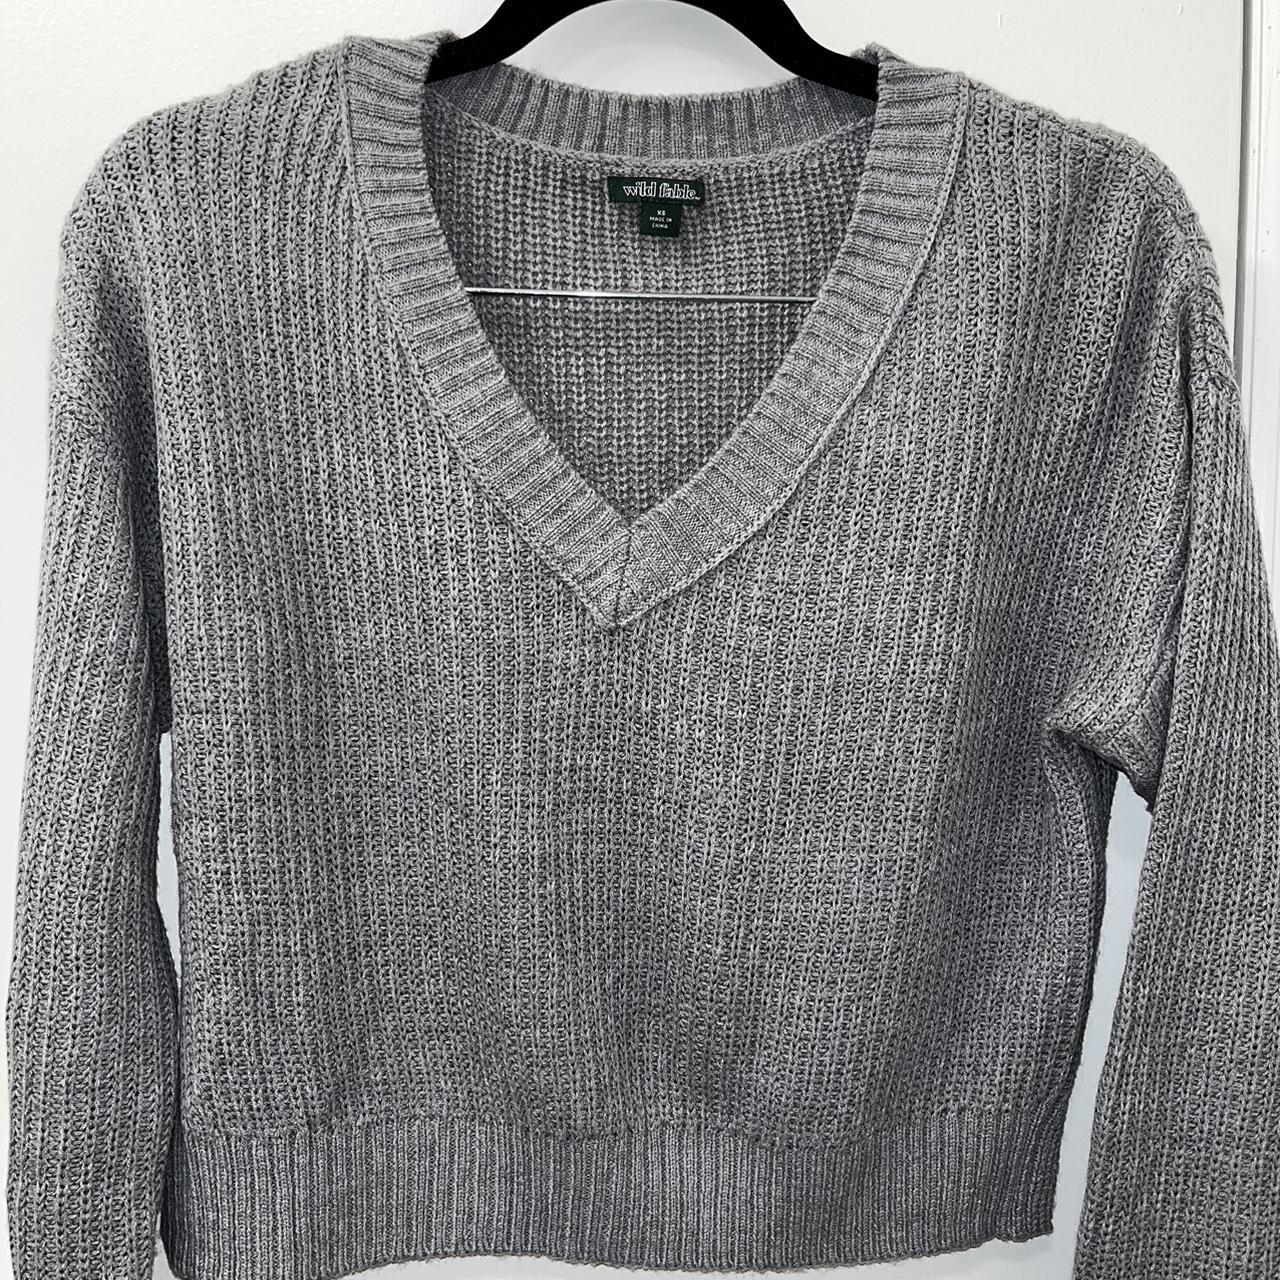 Wild Fable + V-Neck Pullover Sweater